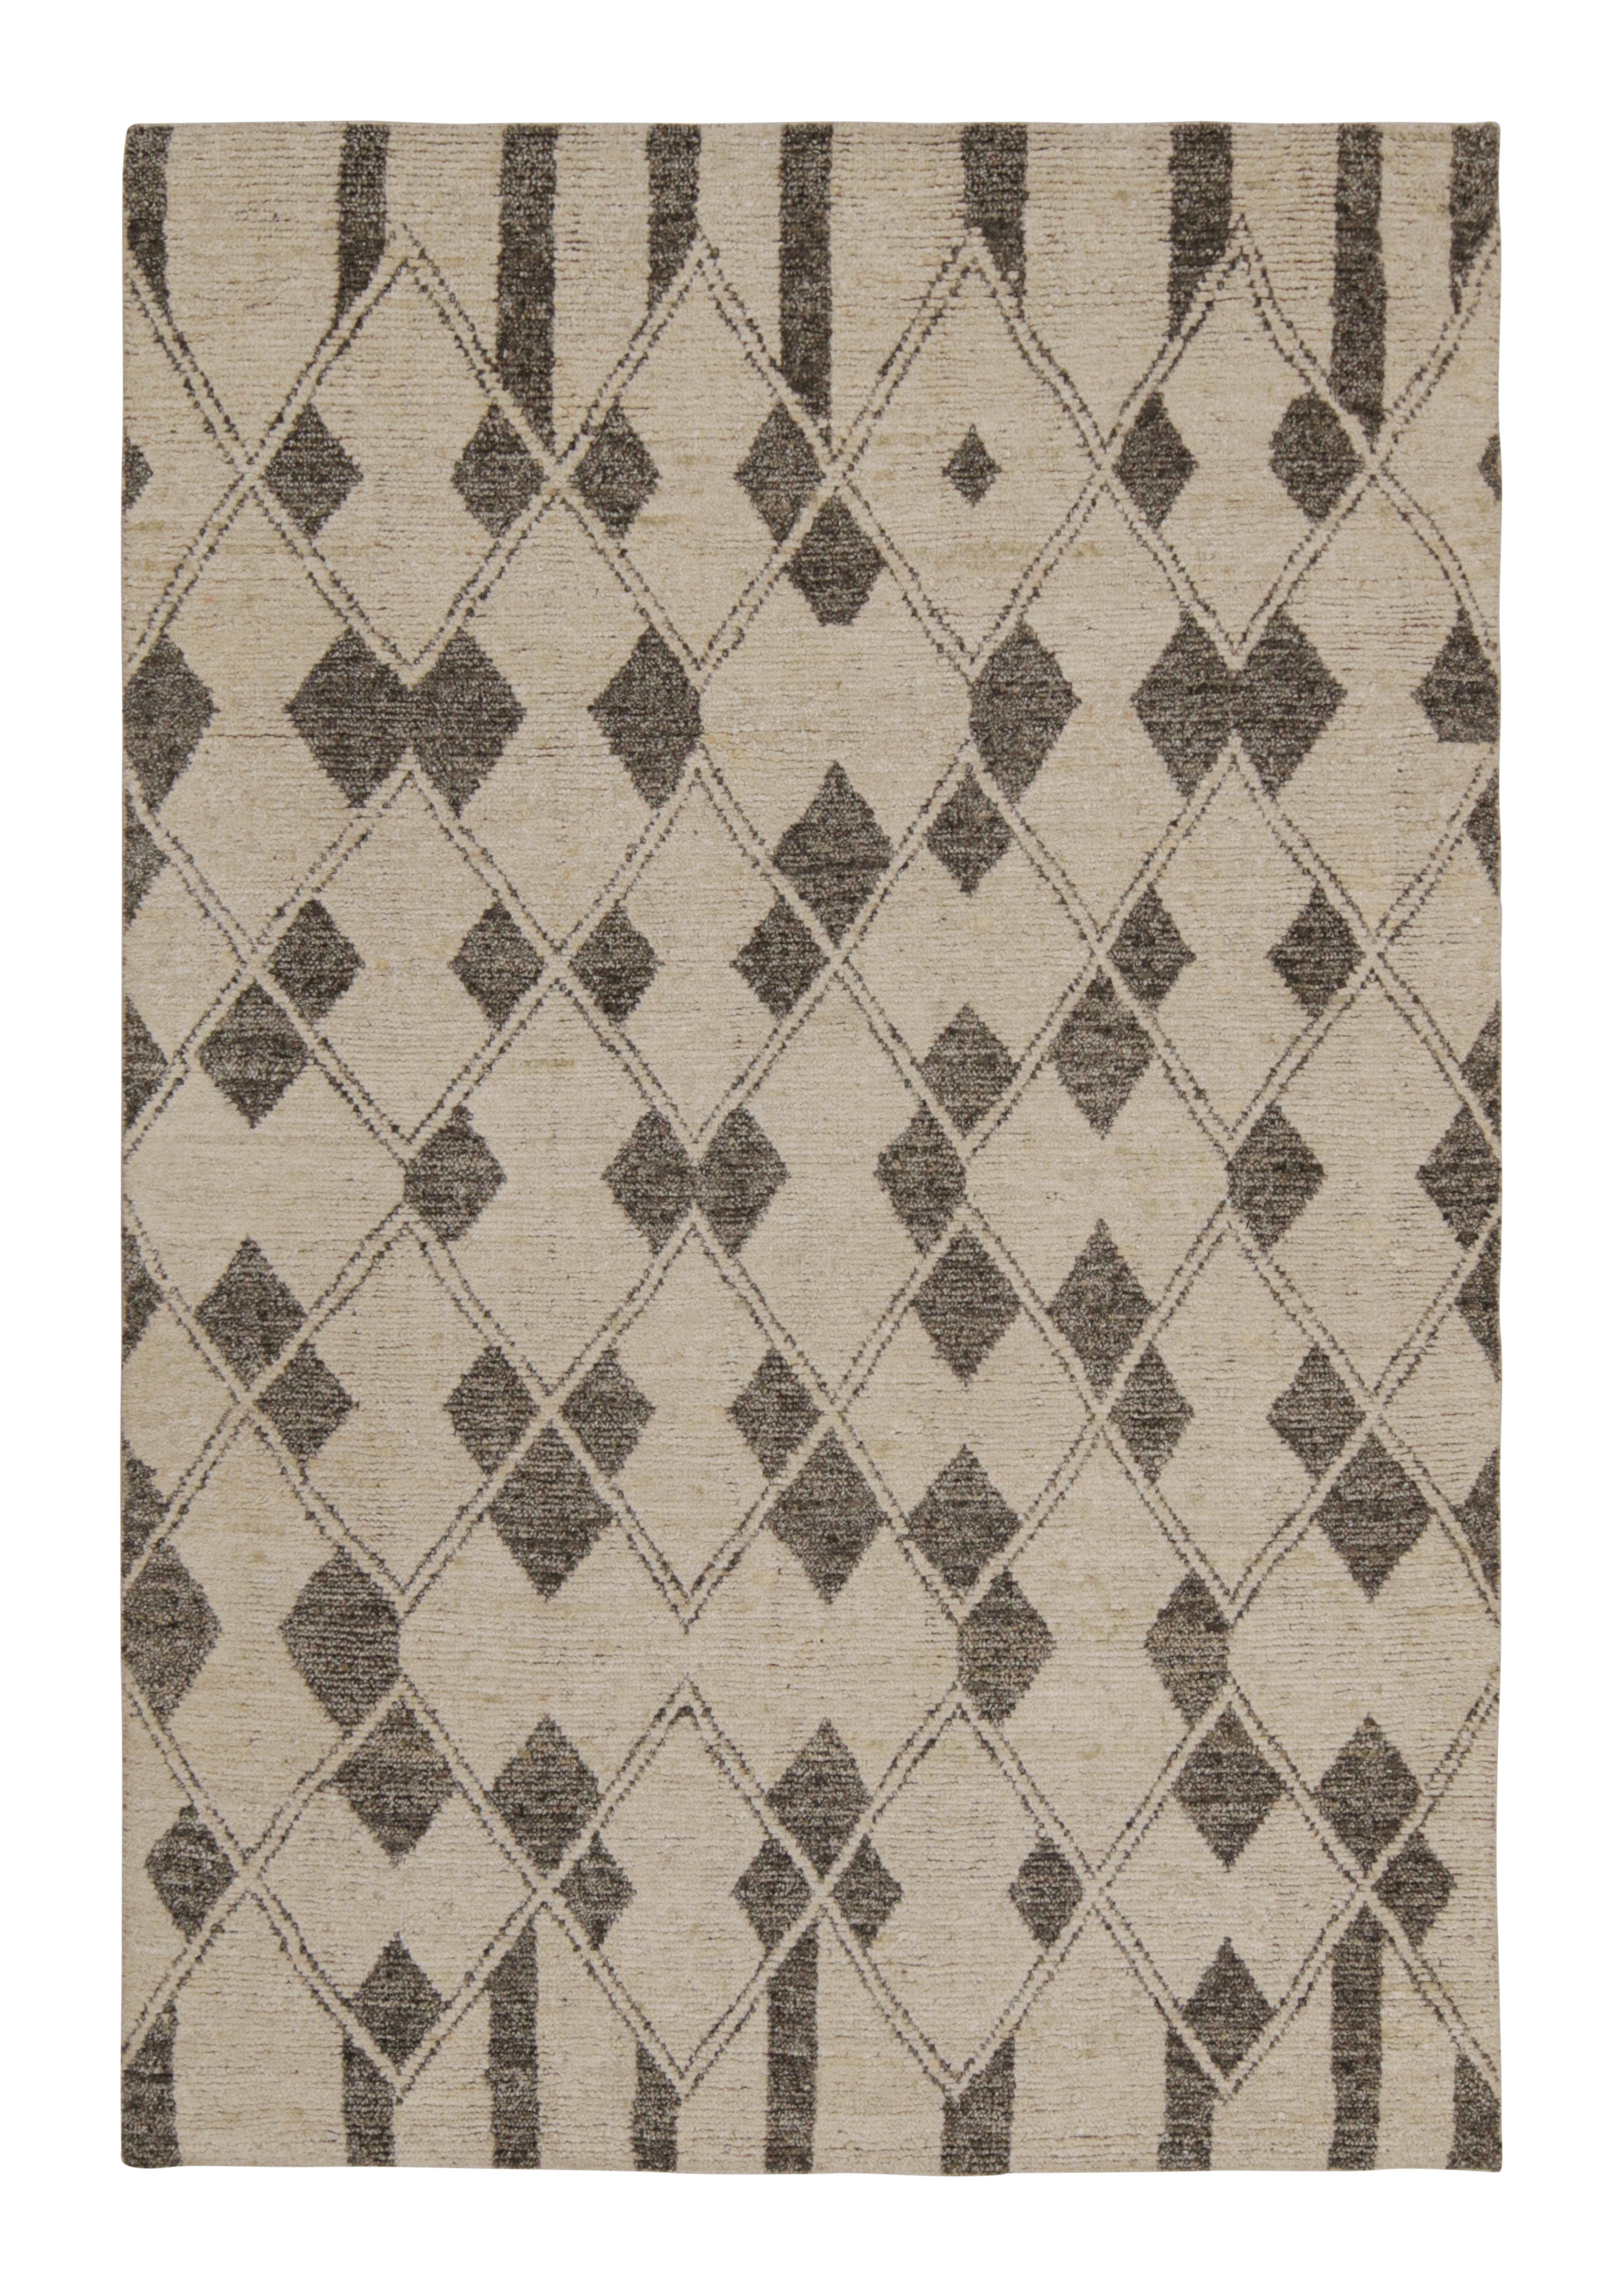 Rug & Kilim’s Moroccan Style Rug in Beige with Gray Diamond Patterns For Sale